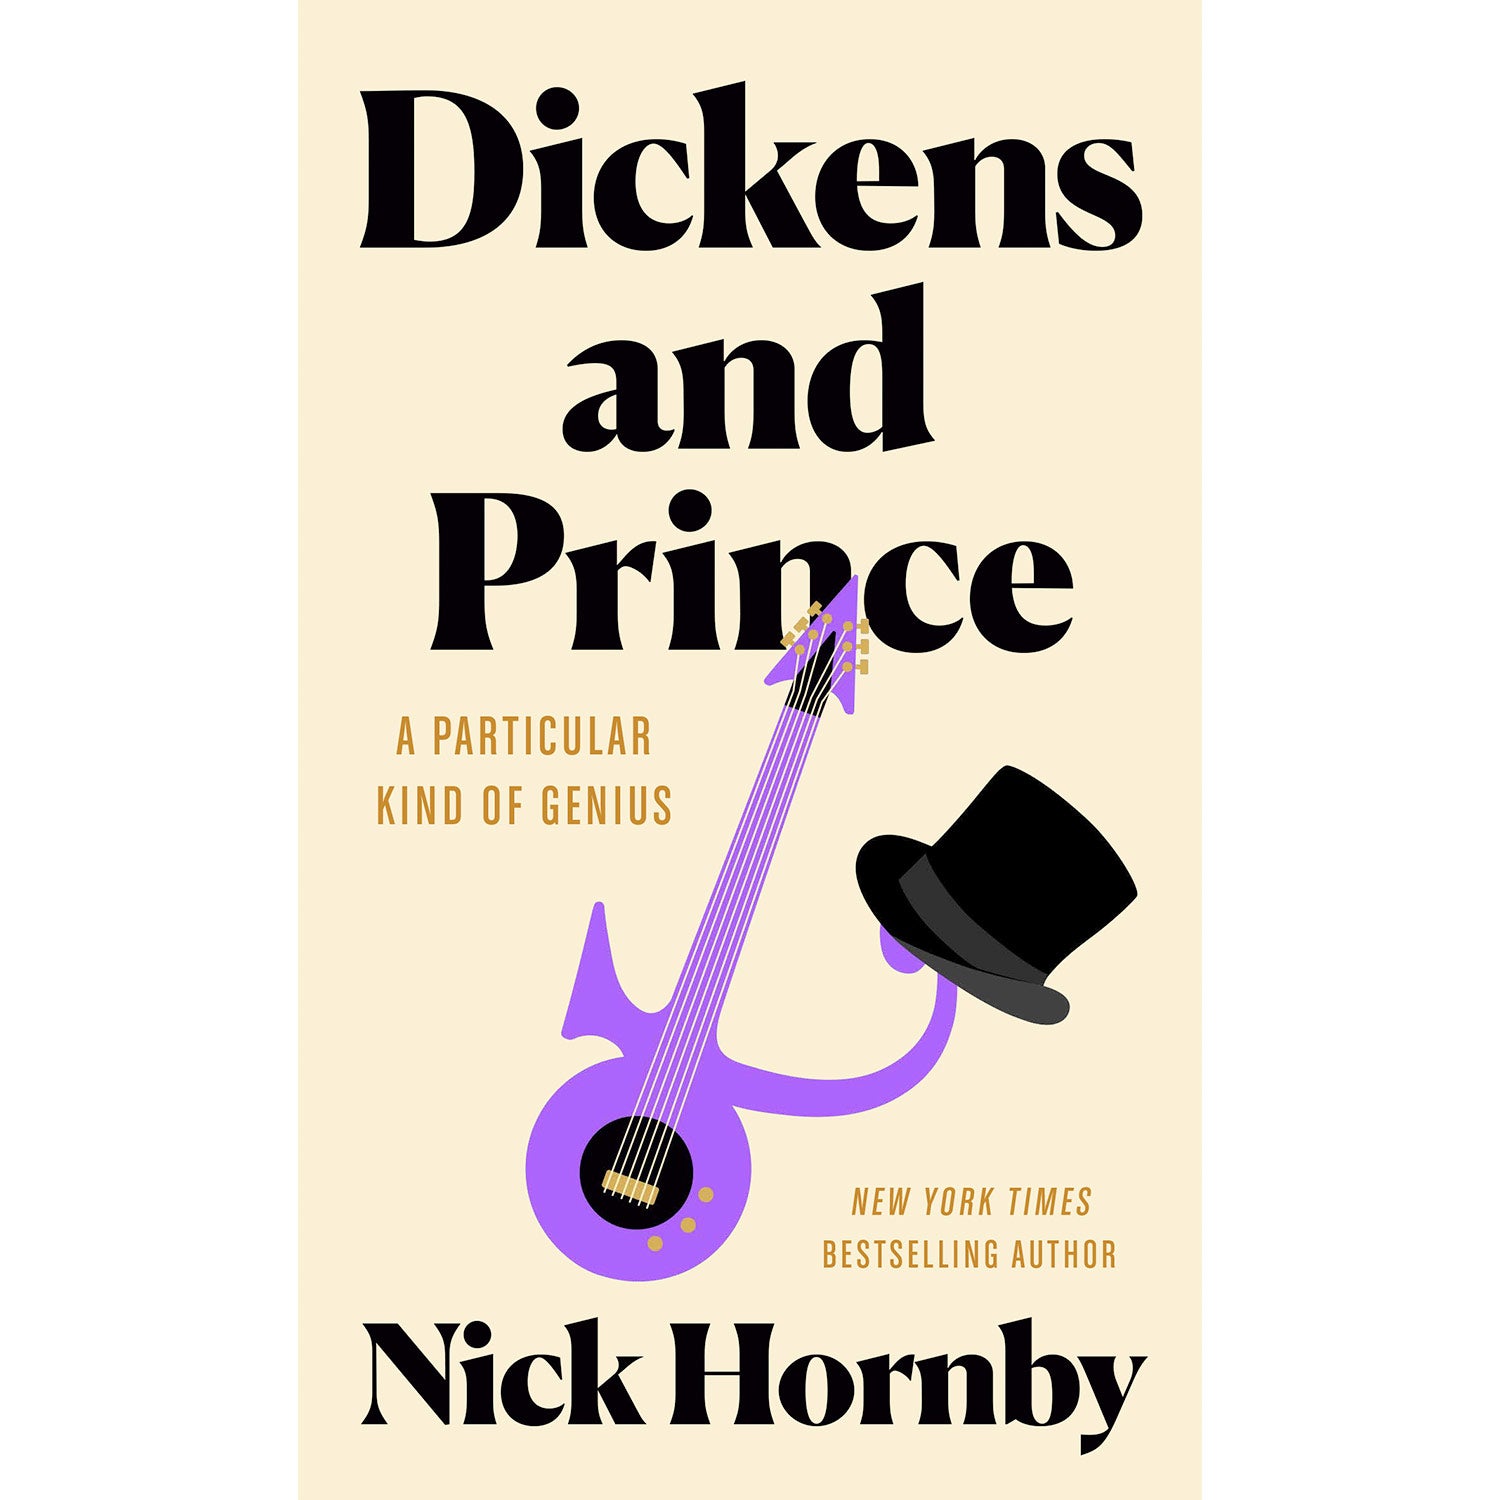 The cover of Dickens and Prince.